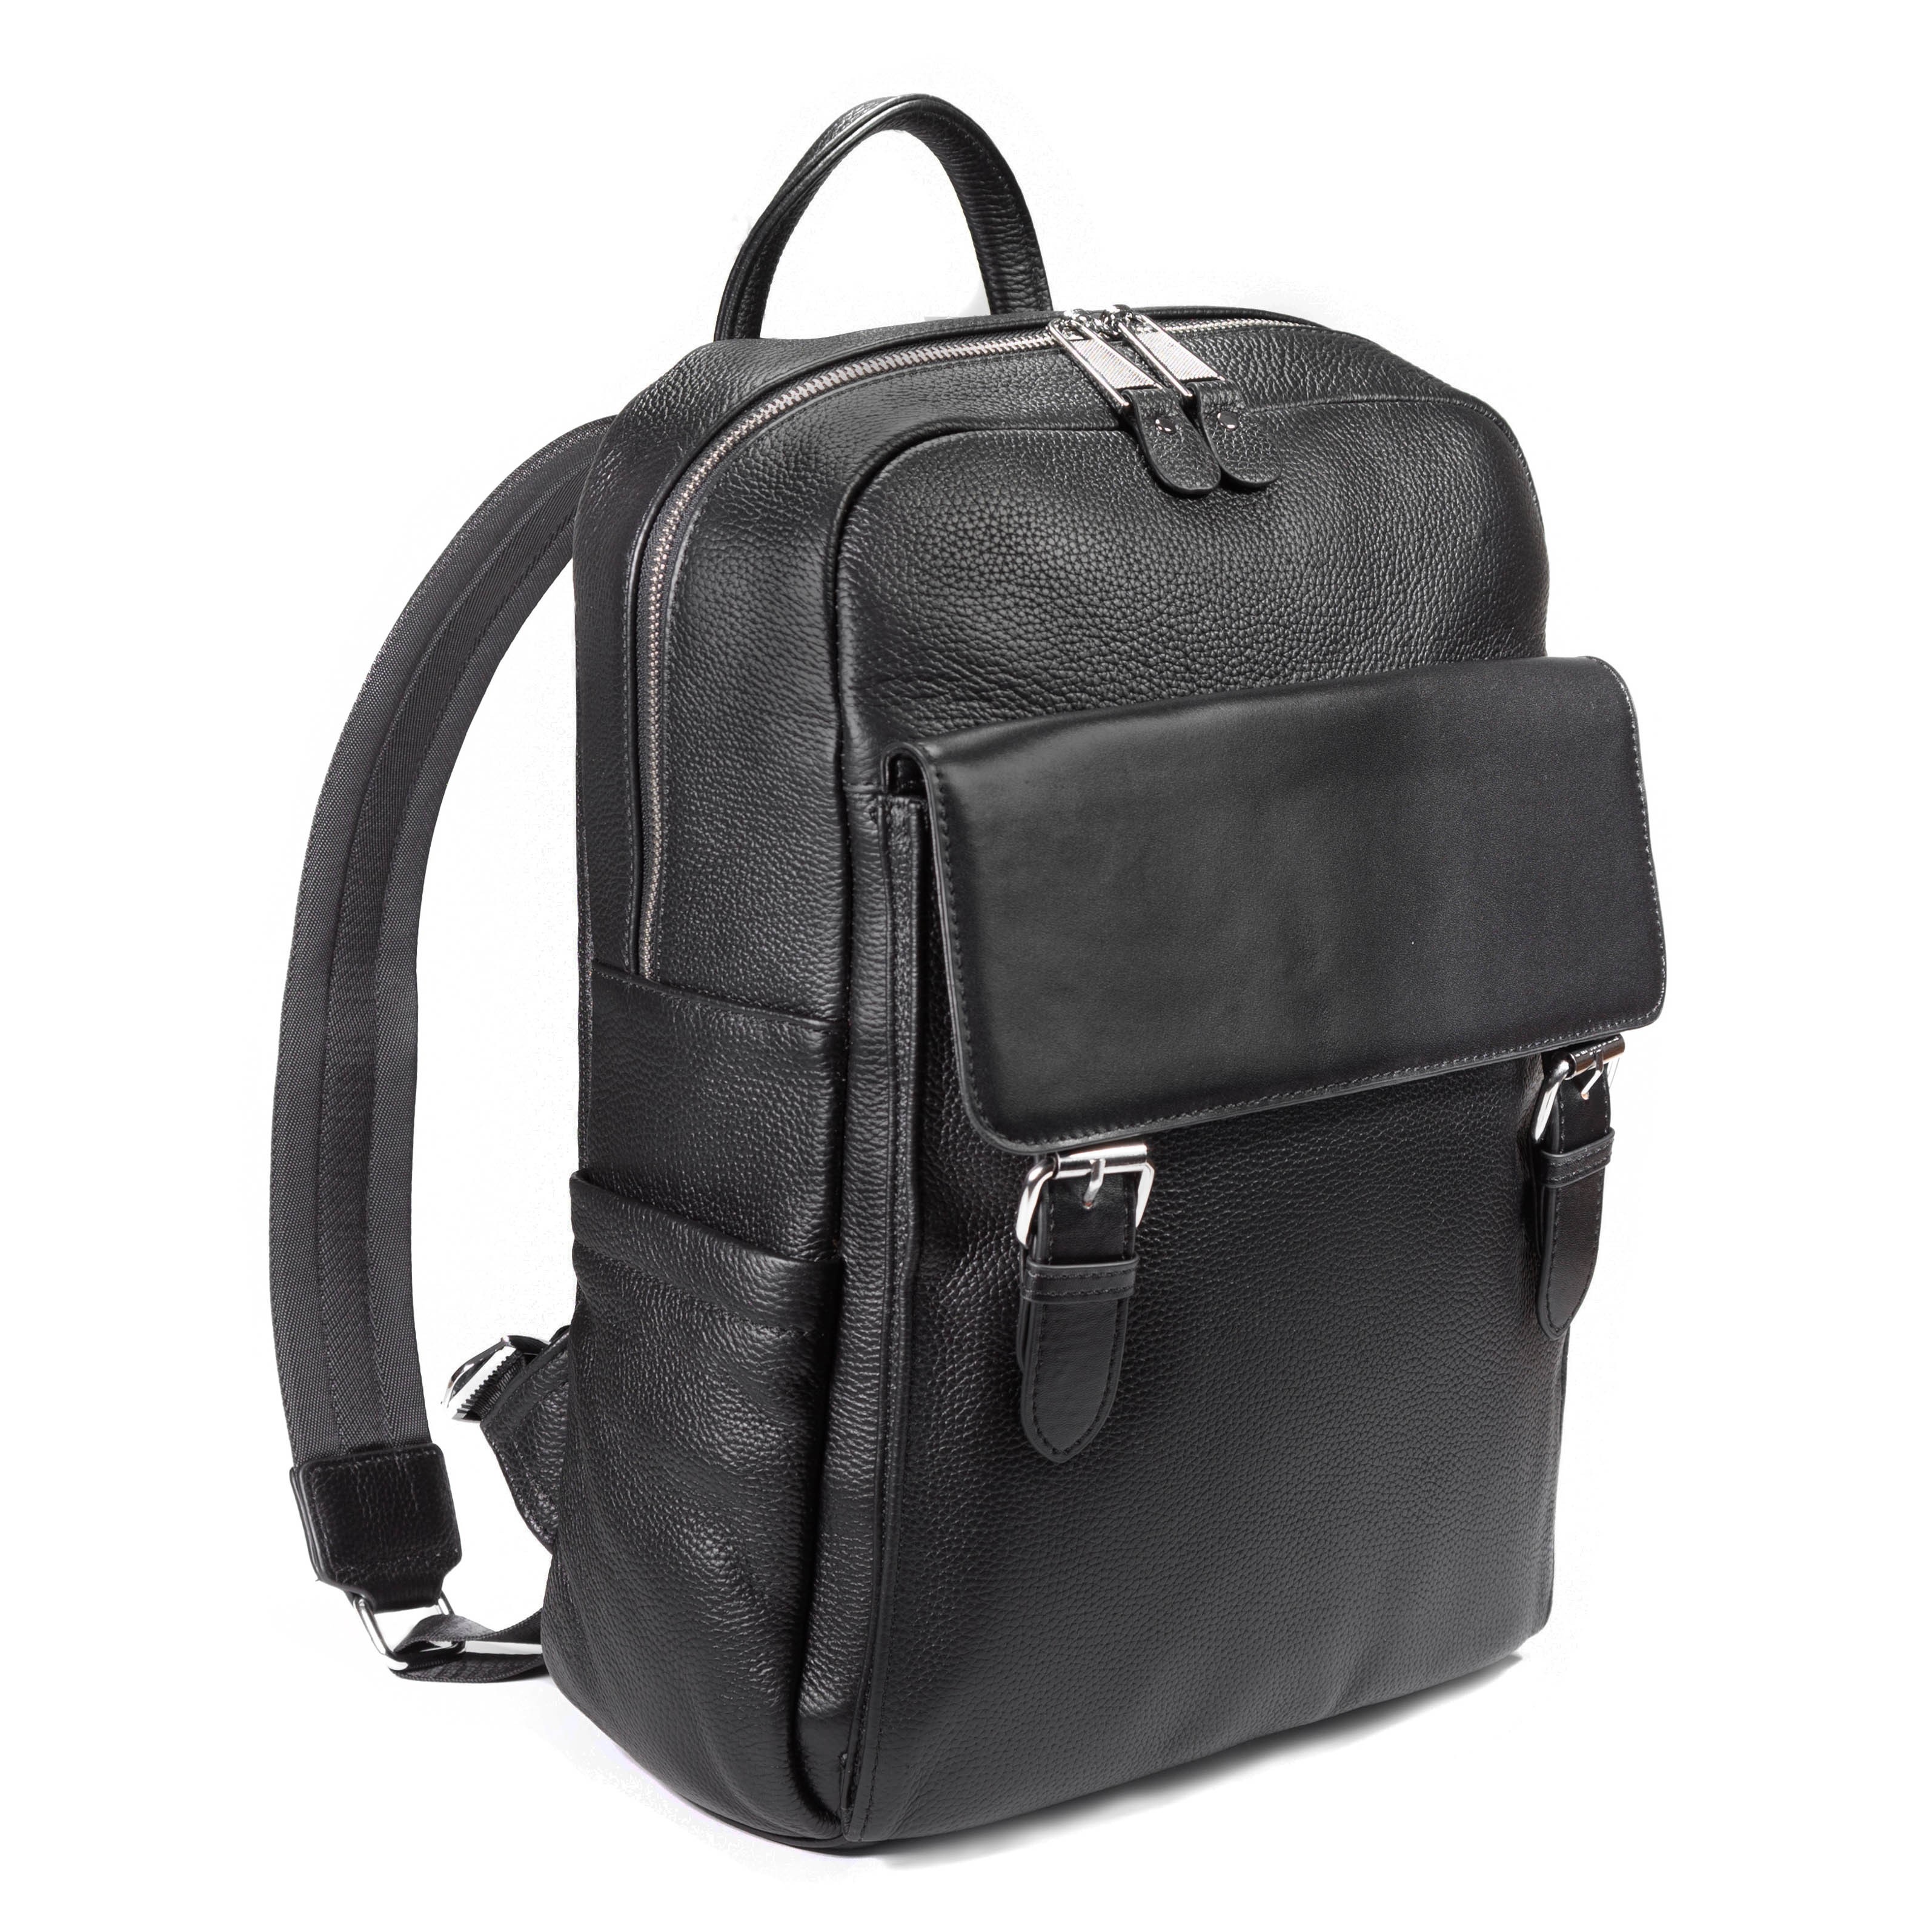 Falcon Leather Twin Buckle Backpack - FI6717 Black